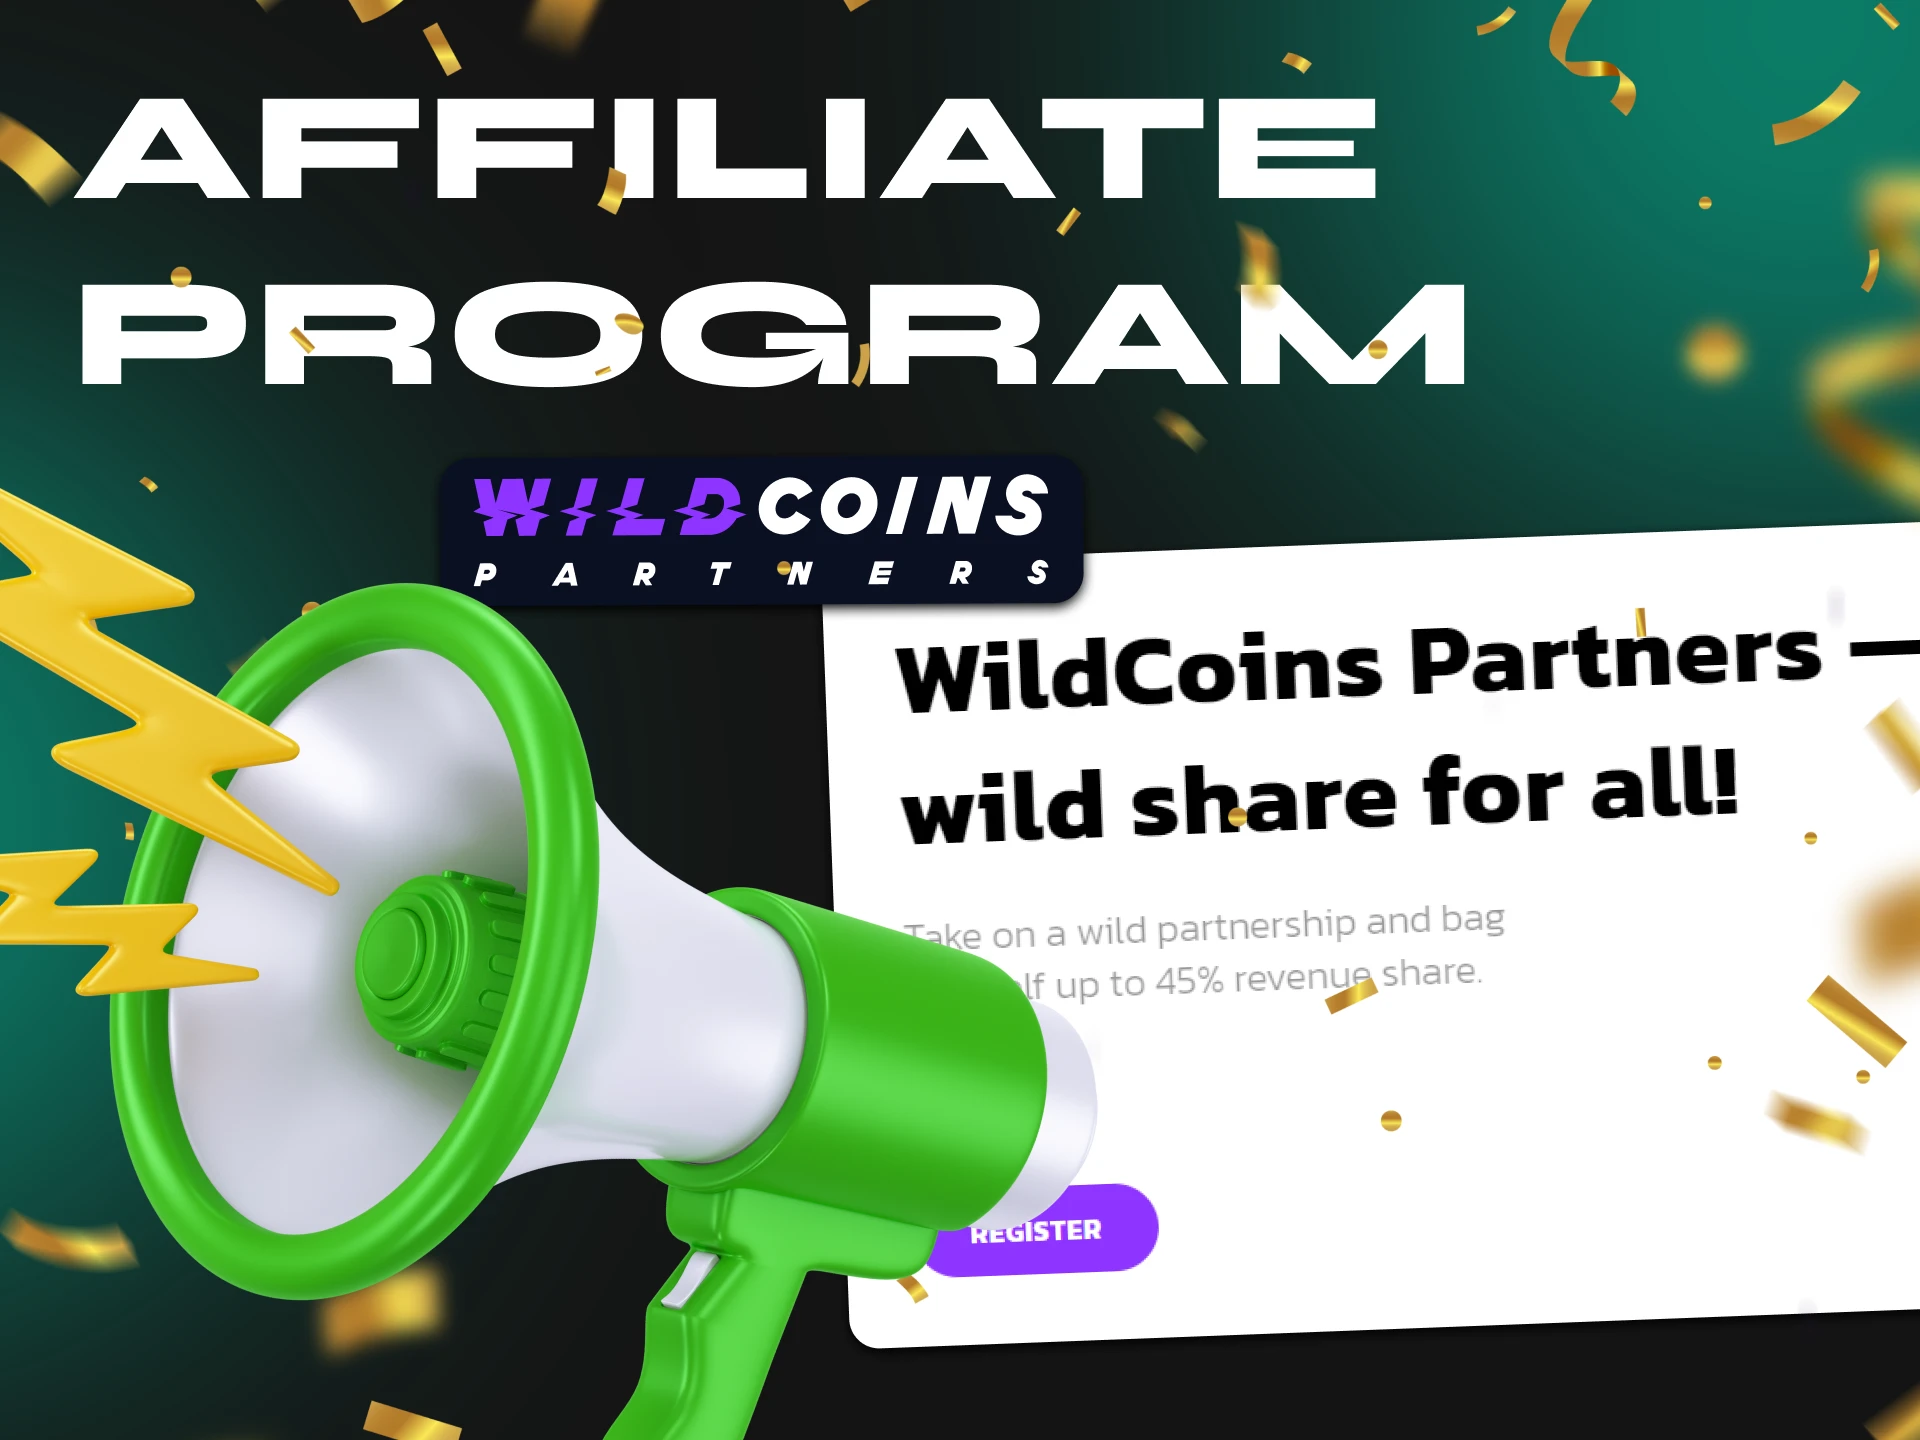 Share Wildcoins Casino with your friends to earn lucrative revenue.